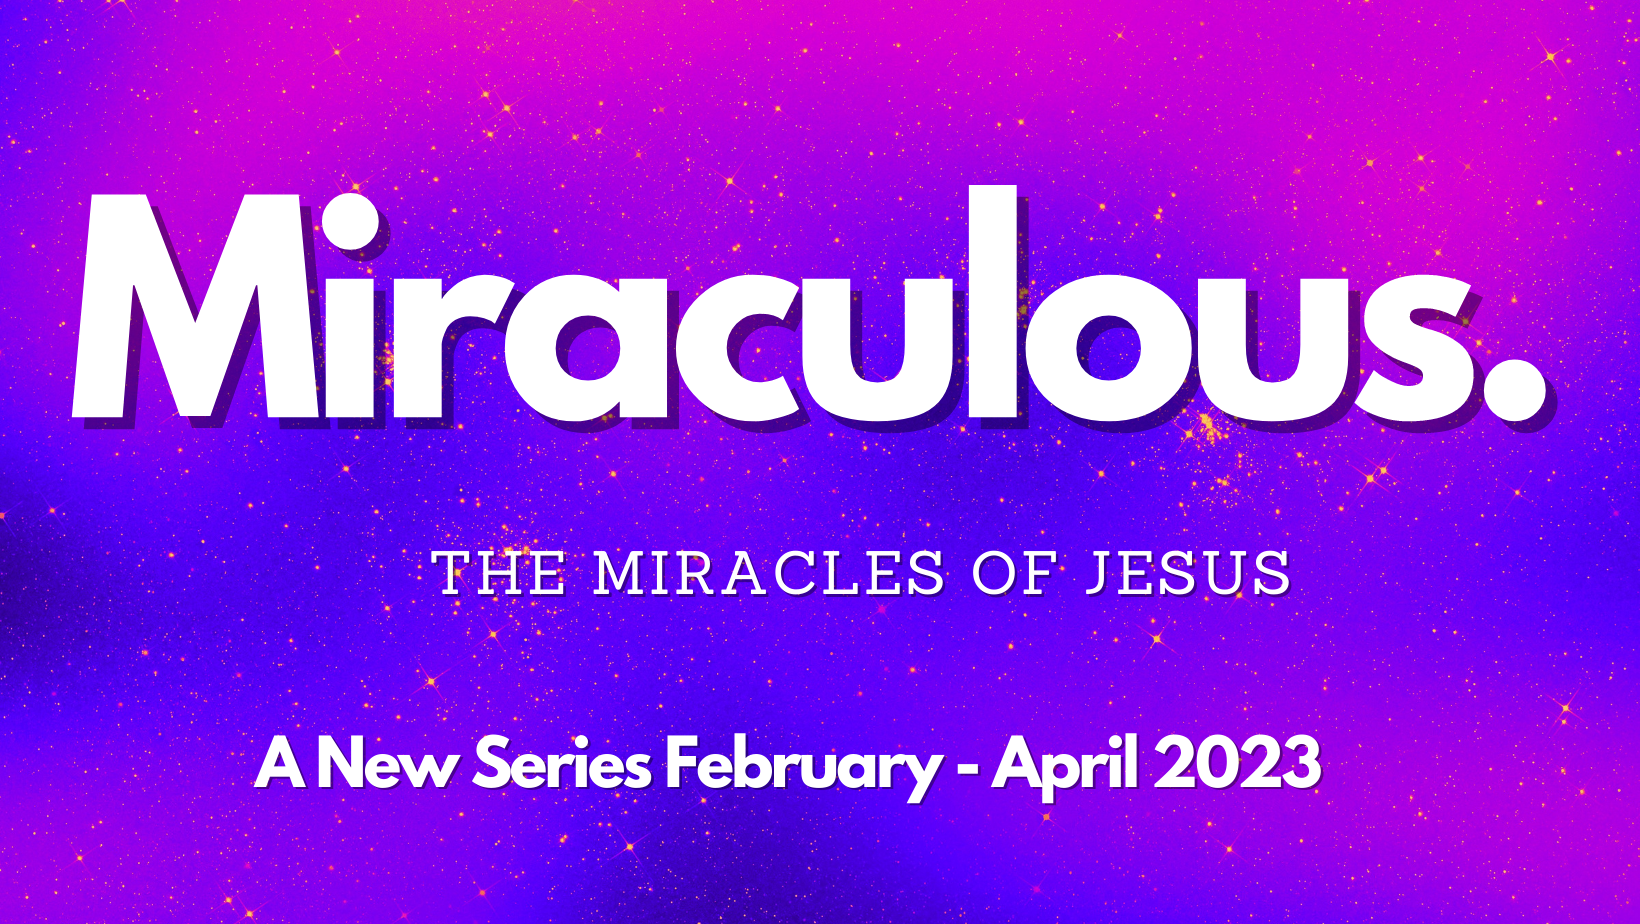 Miraculous - Out of the ordinary can spring the miraculous